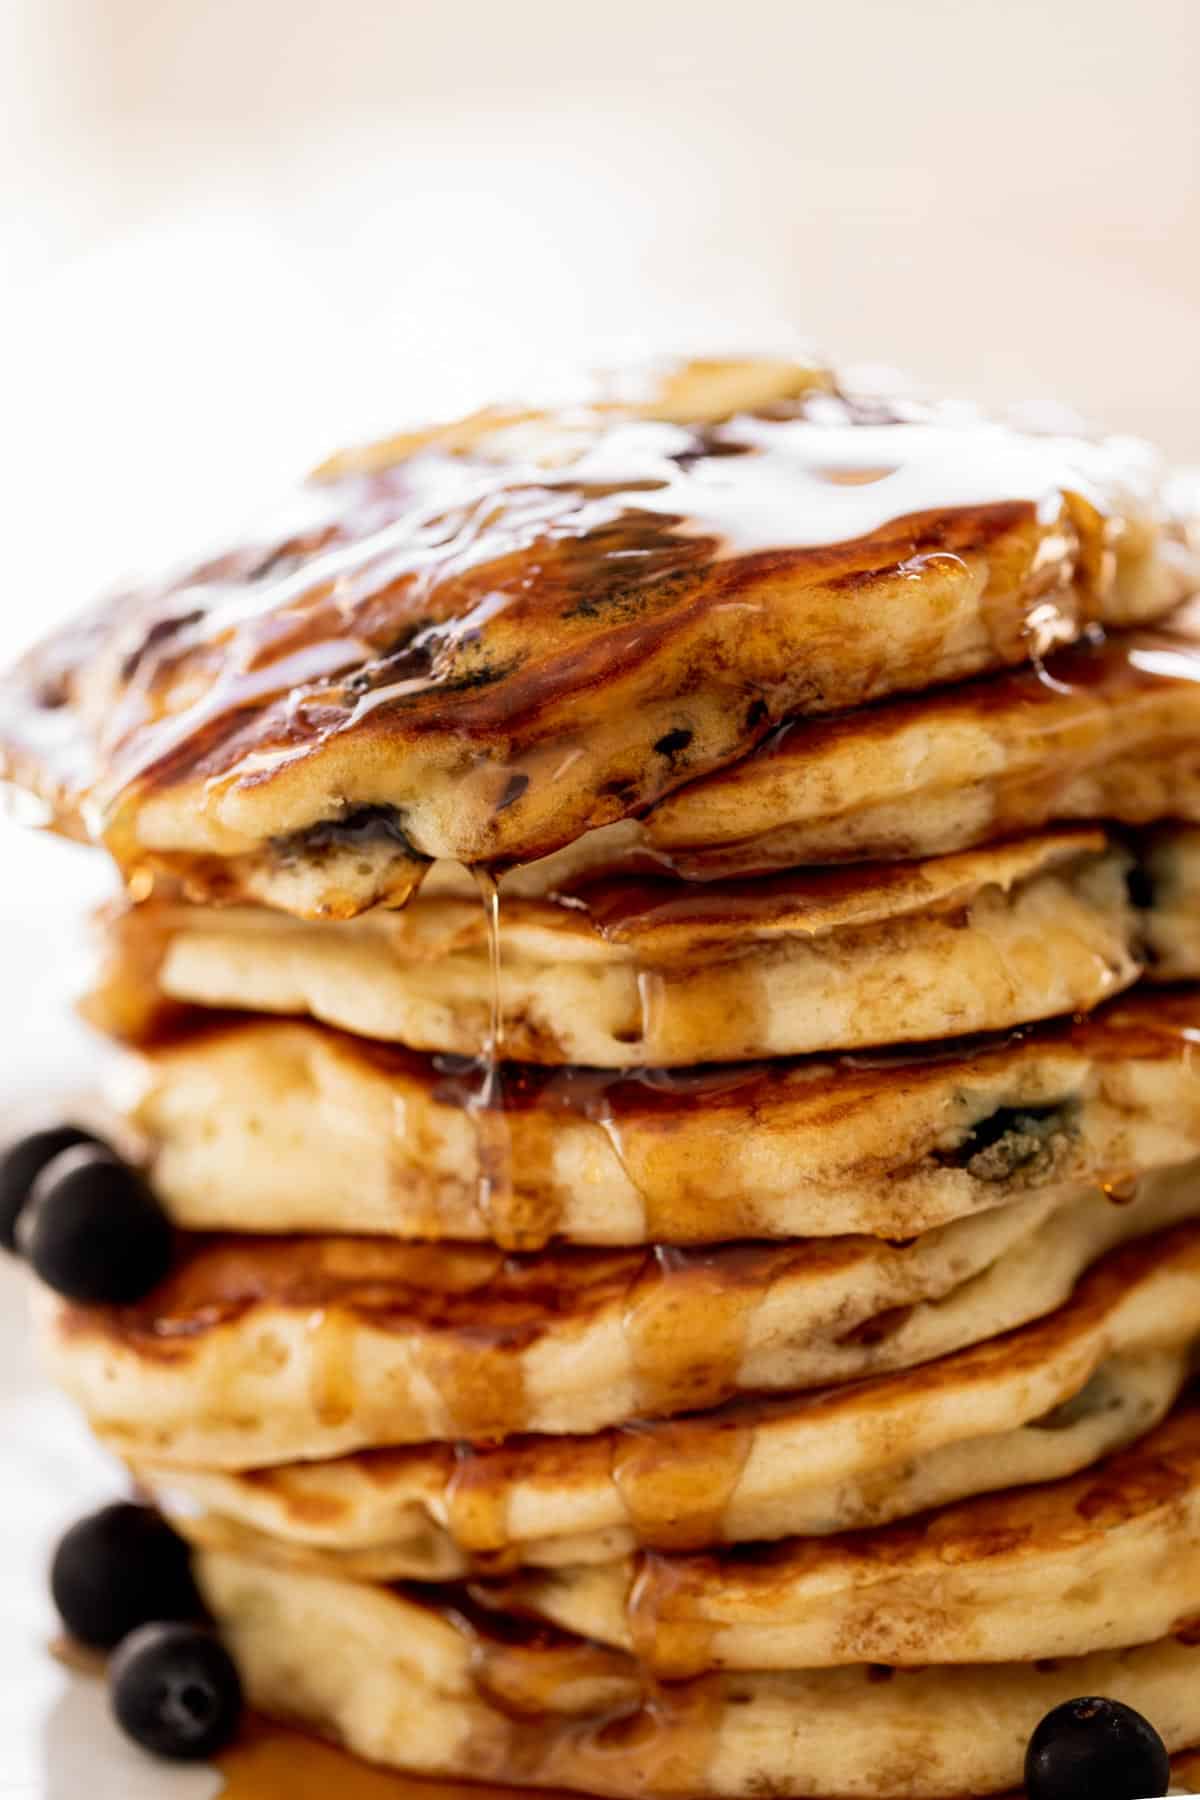 A stack of Blueberry Pancakes on a plate with maple syrup. Topped with fresh blueberries | howtomake.info